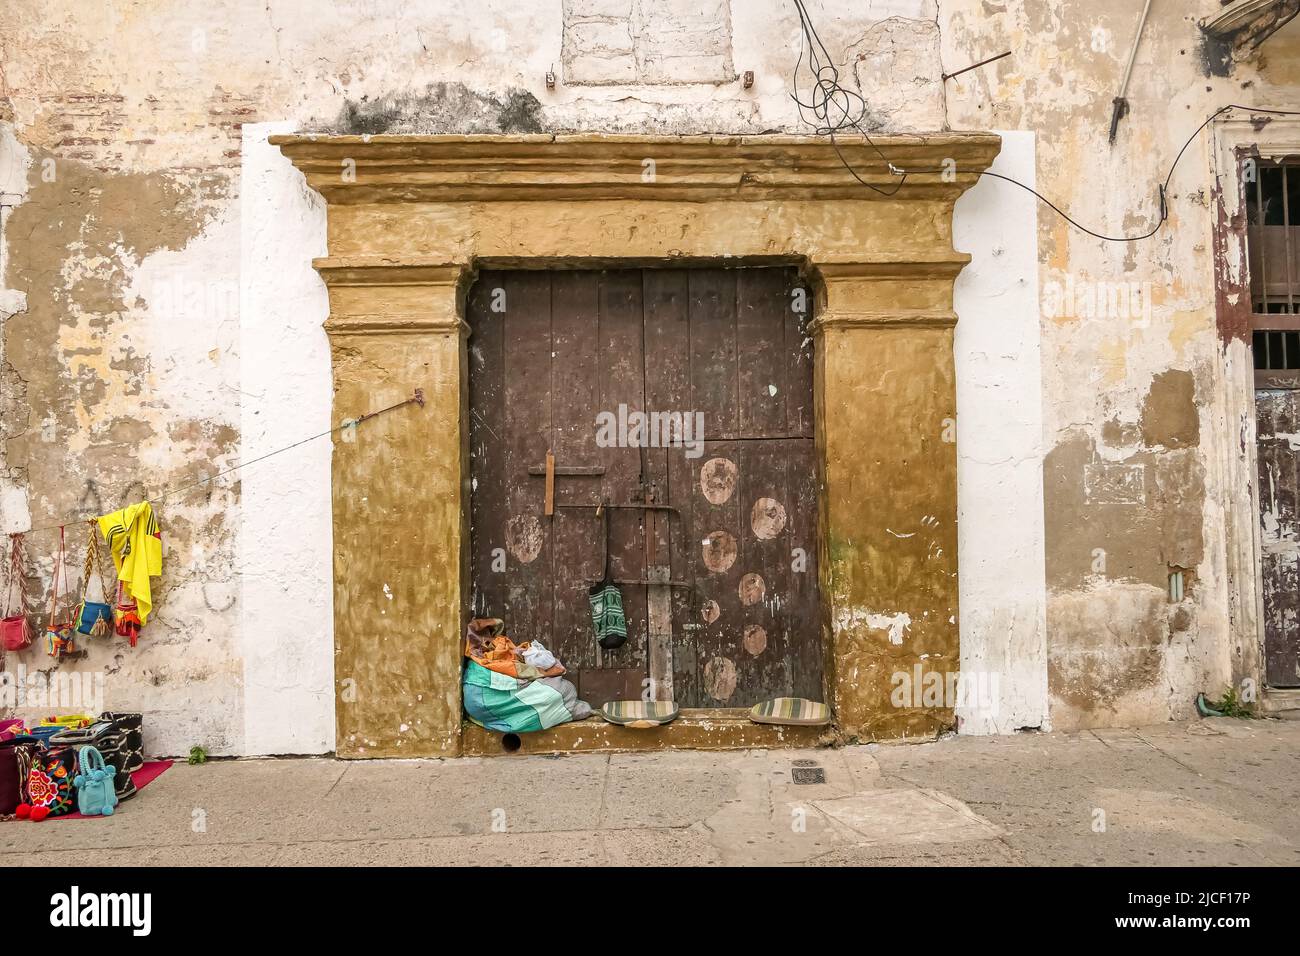 Old church door with colorful selling goods of a street vendor, Cartagena, Colombia Stock Photo